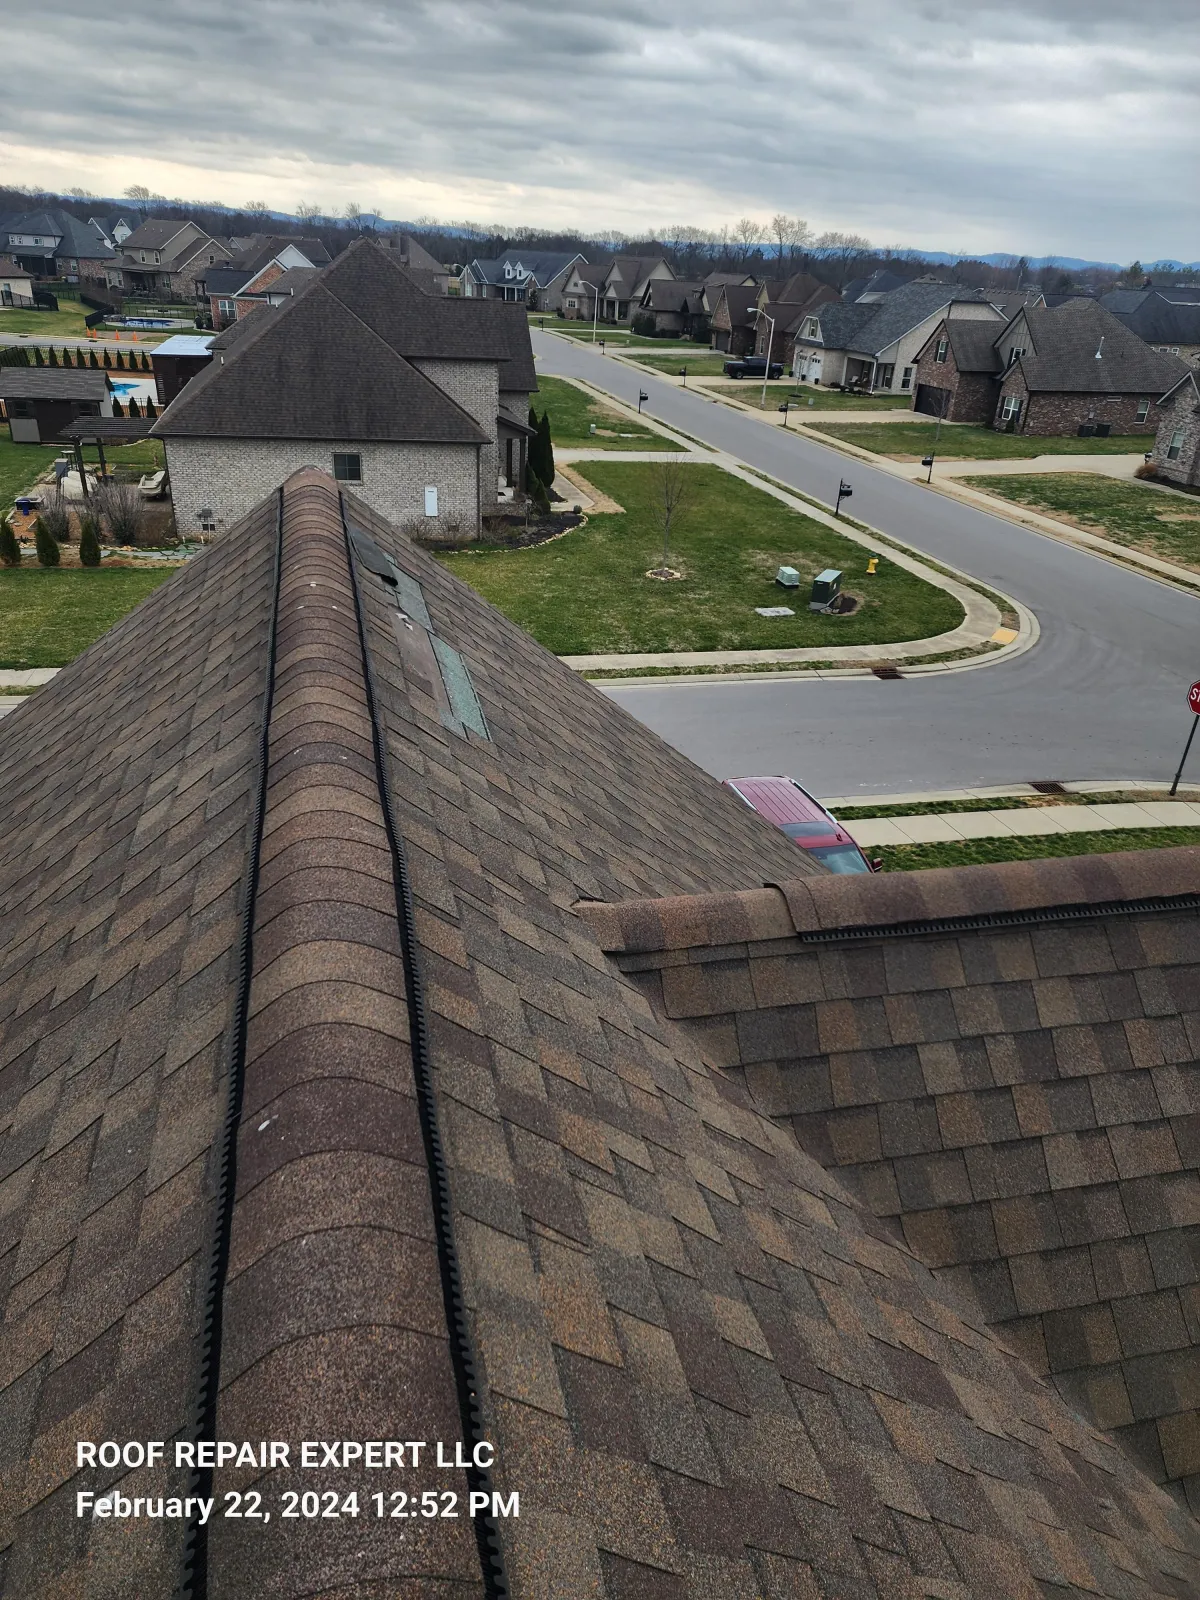 Aerial view of a damaged roof in Murfreesboro before the repair, showing the extent of storm damage